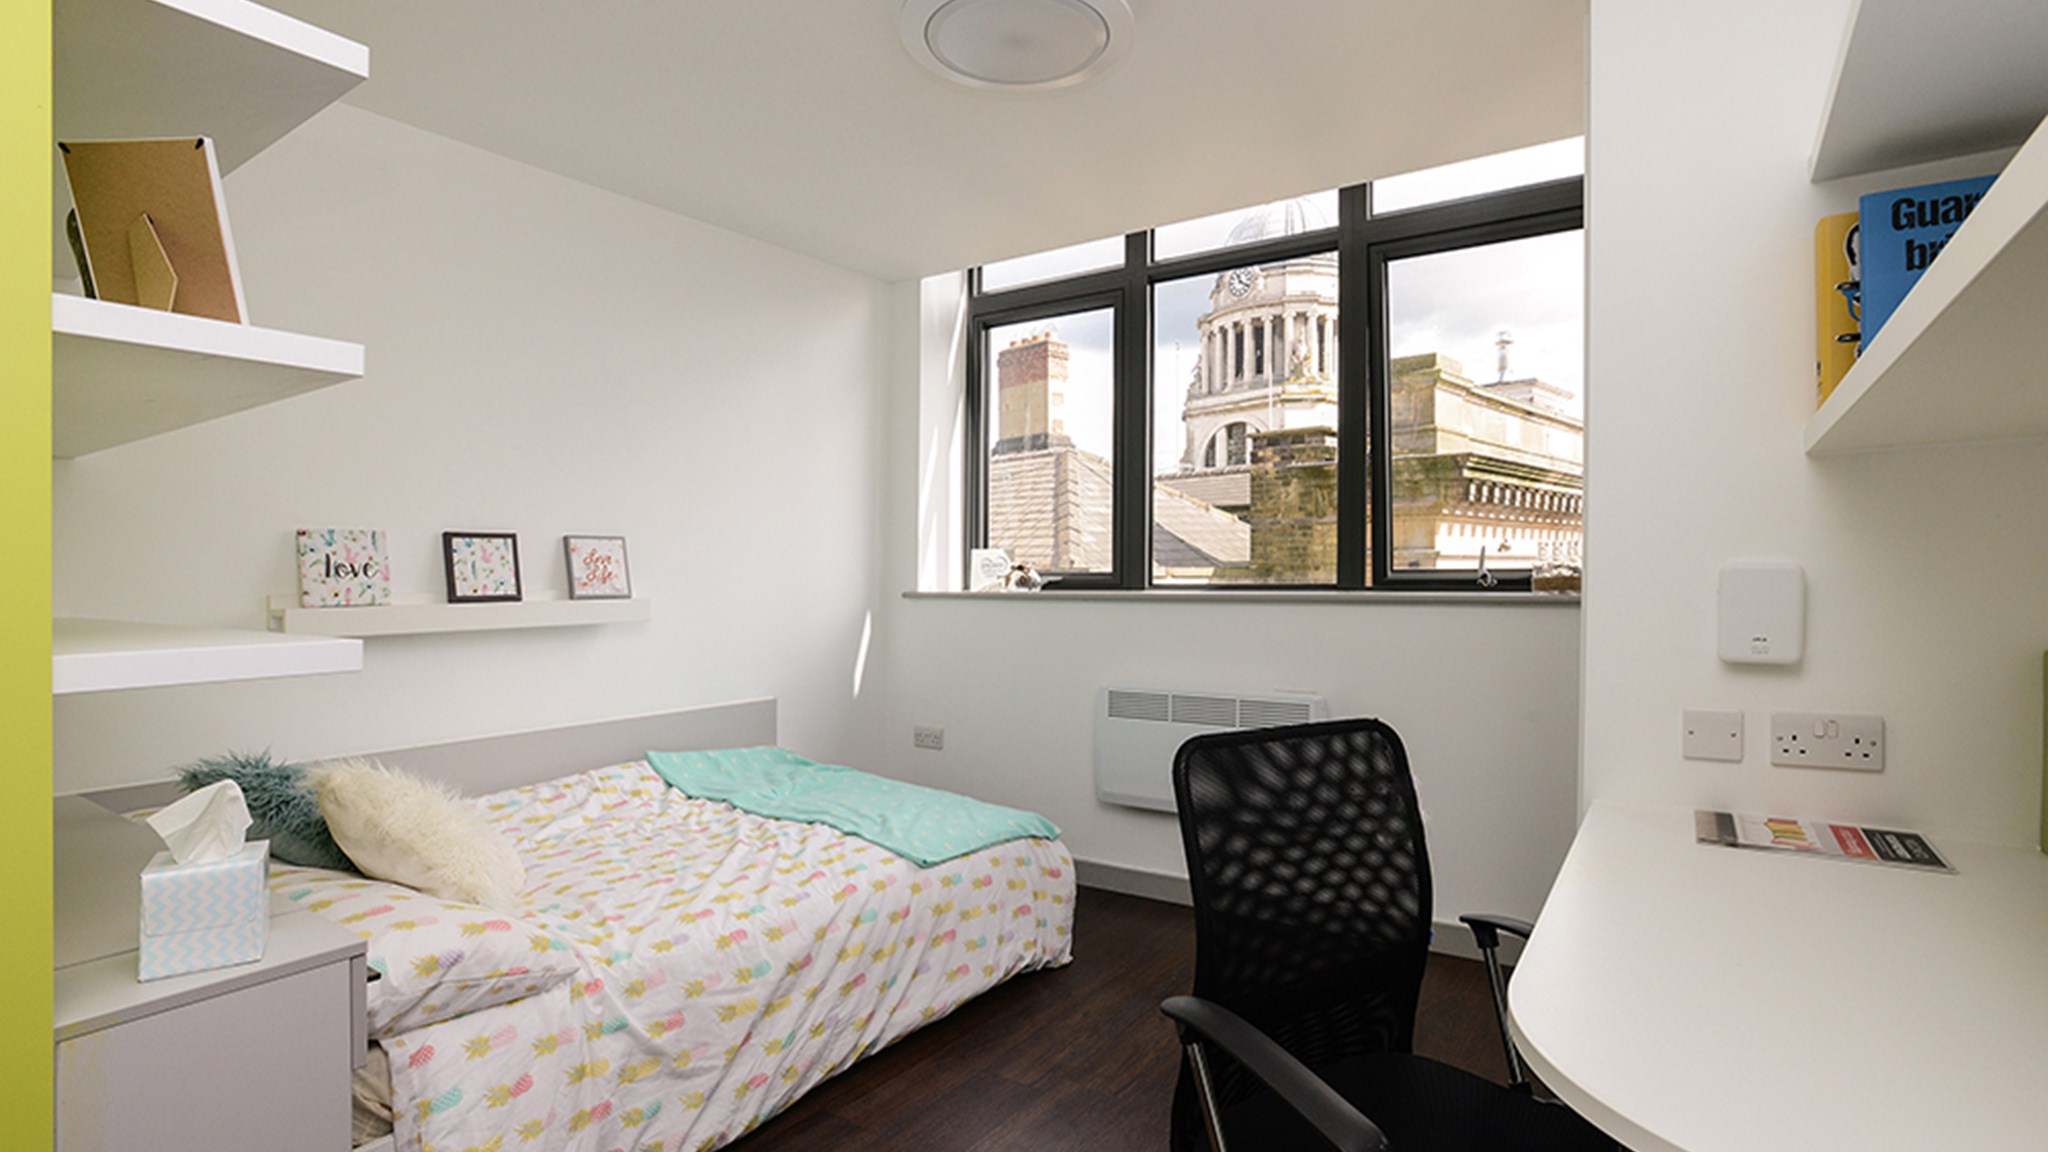 The Student Hideout (6 Bed Shared Flat), Market Square, City Centre, NG1 10